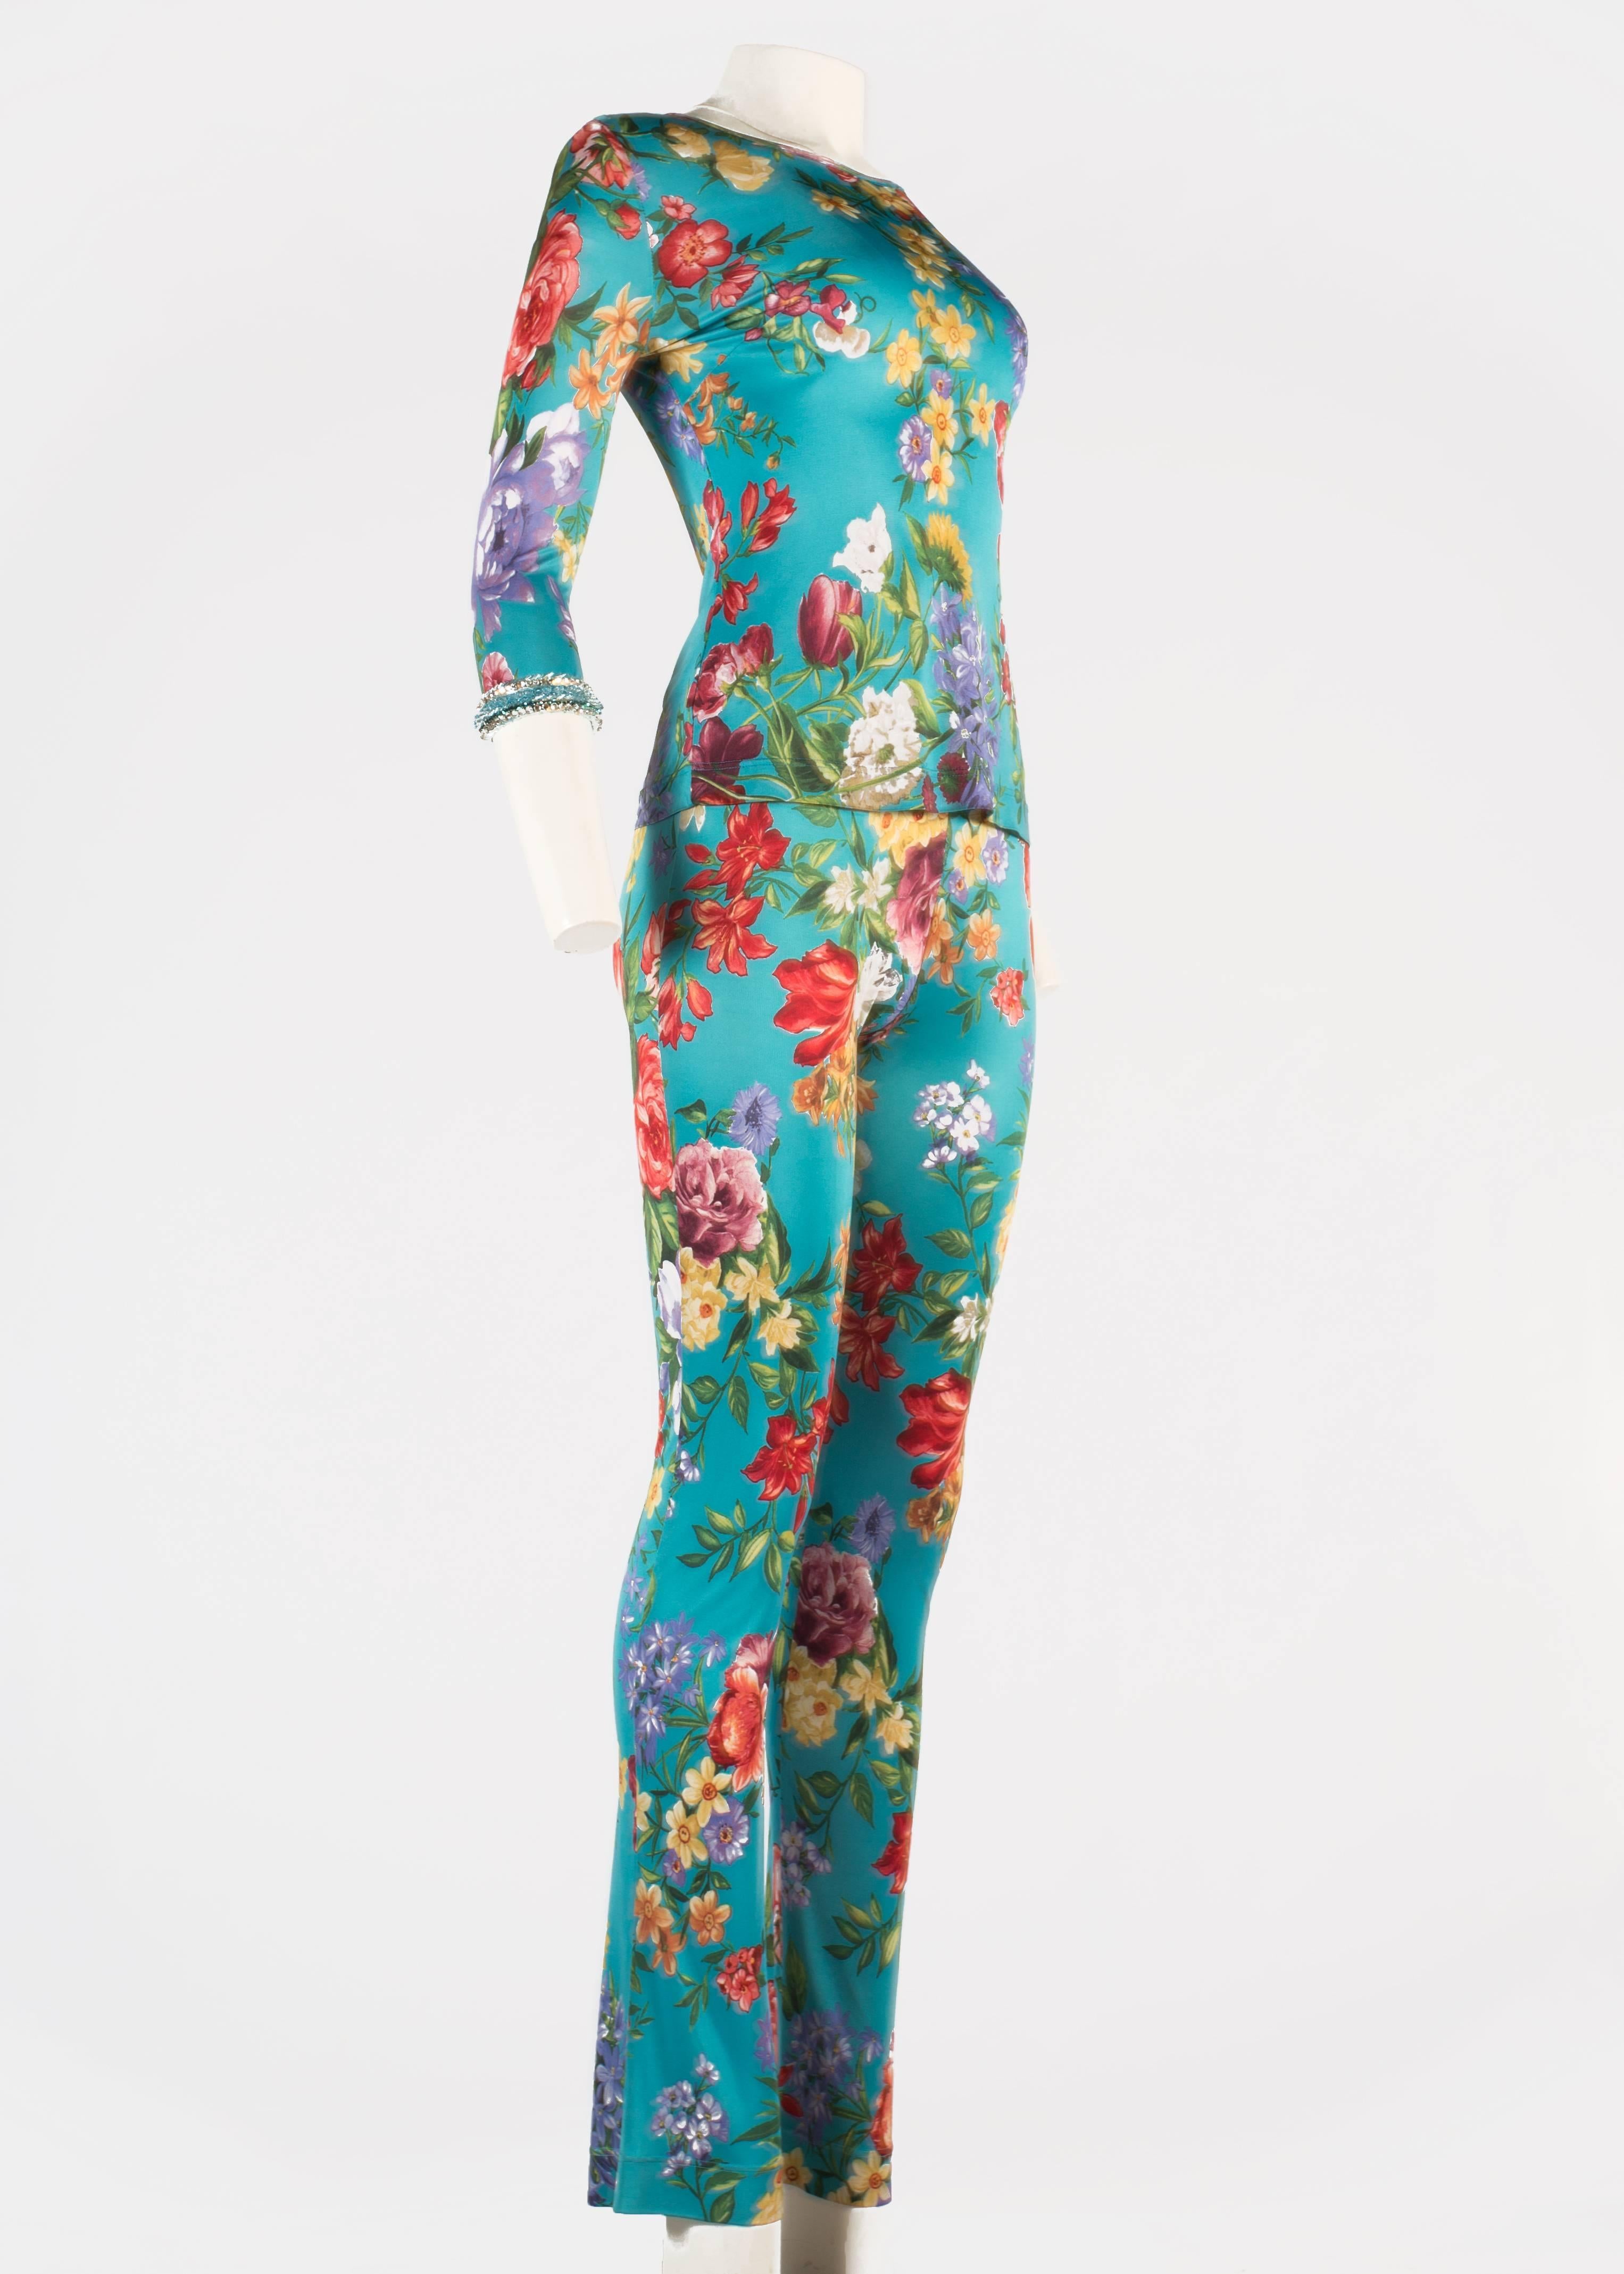 Dolce & Gabbana viscose jersey turquoise floral pant suit with embellished cuffs

c. 1996-1999